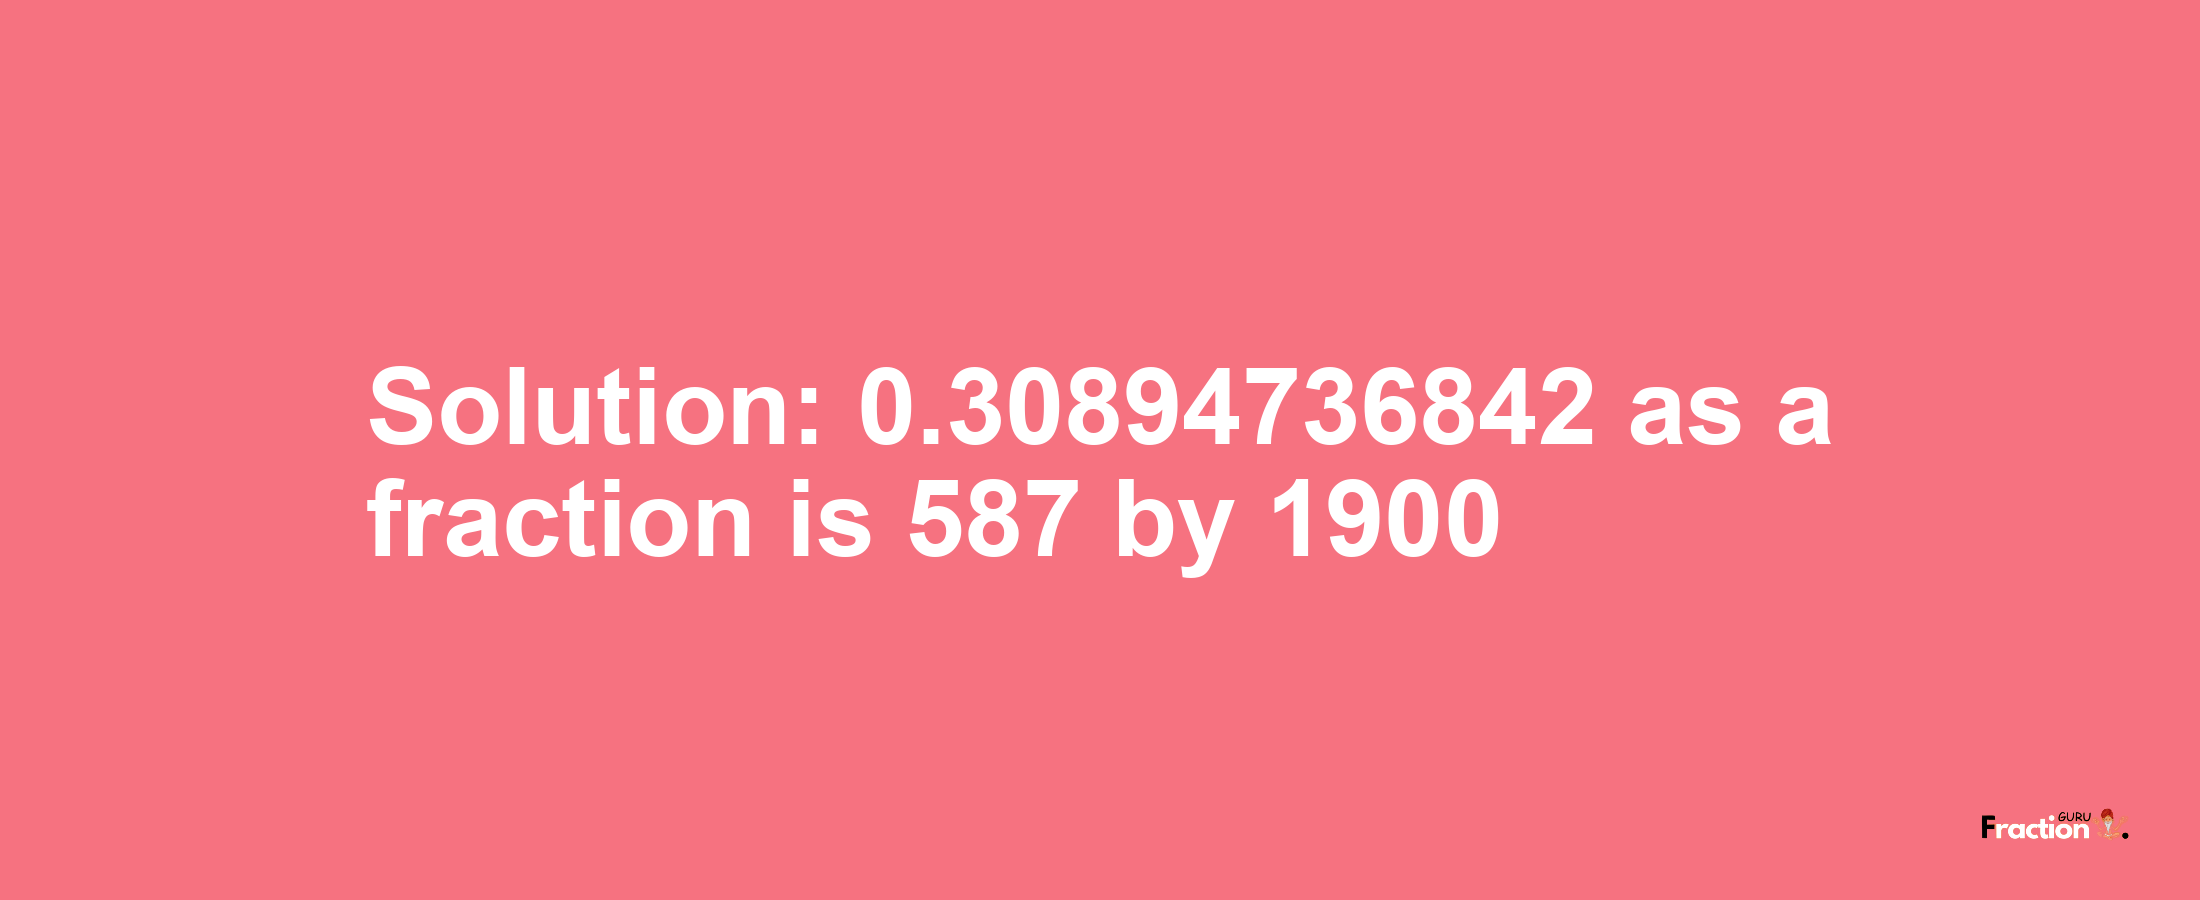 Solution:0.30894736842 as a fraction is 587/1900